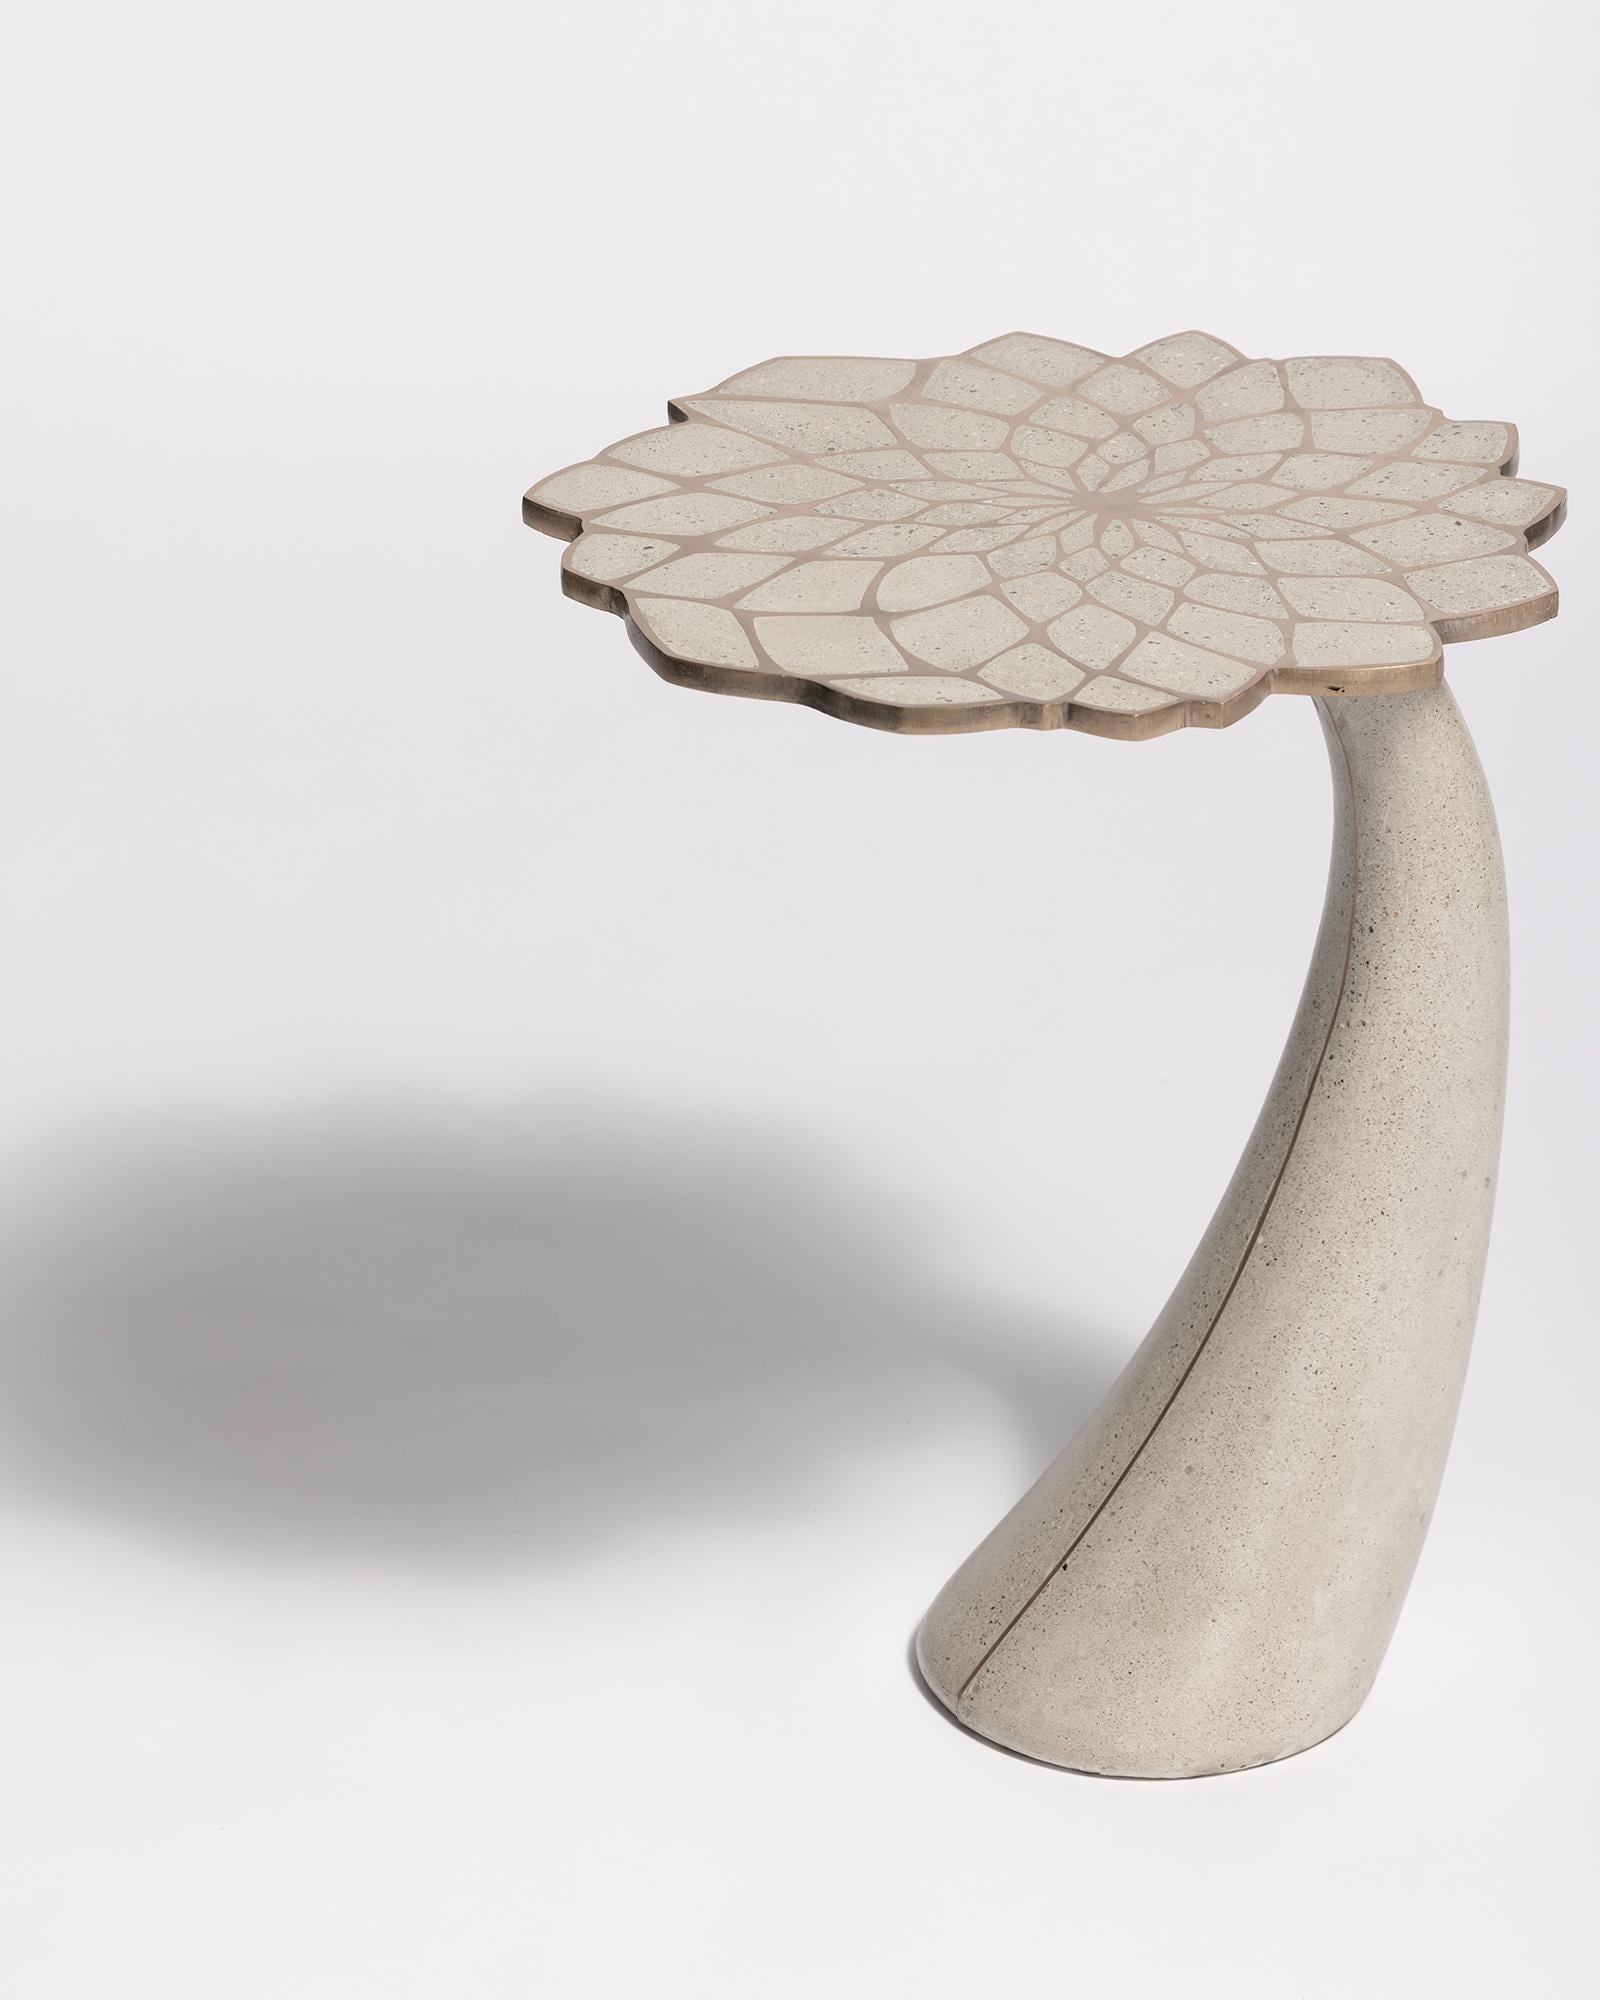 James de Wulf Exo Mosaic Lily Side Table For Sale 2